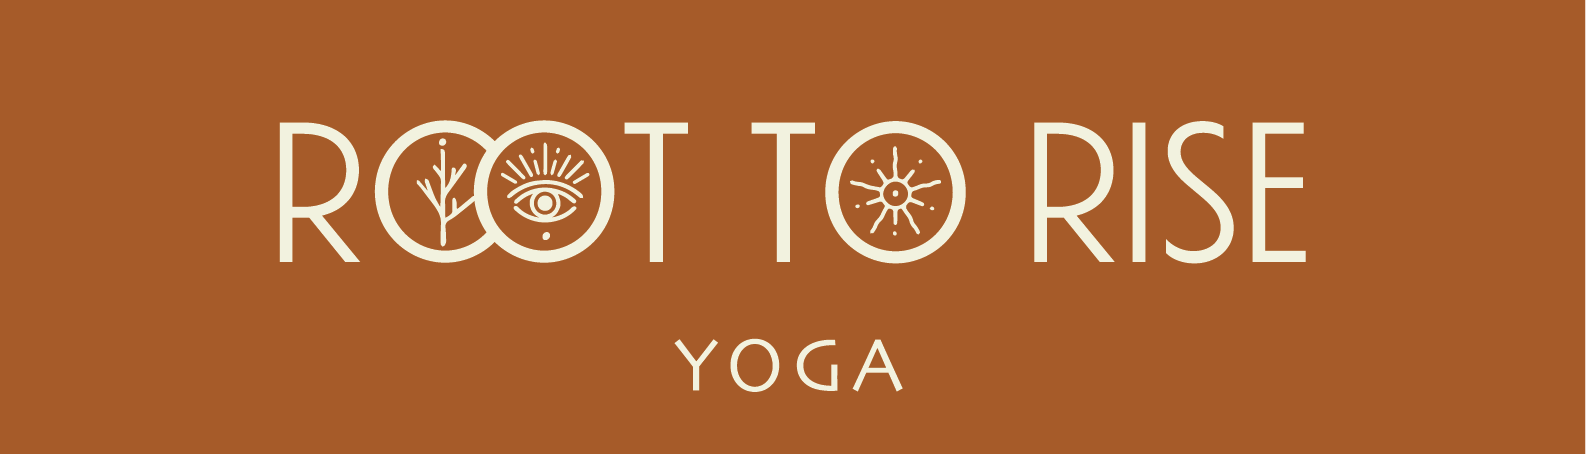 Root to Rise Yoga Denver